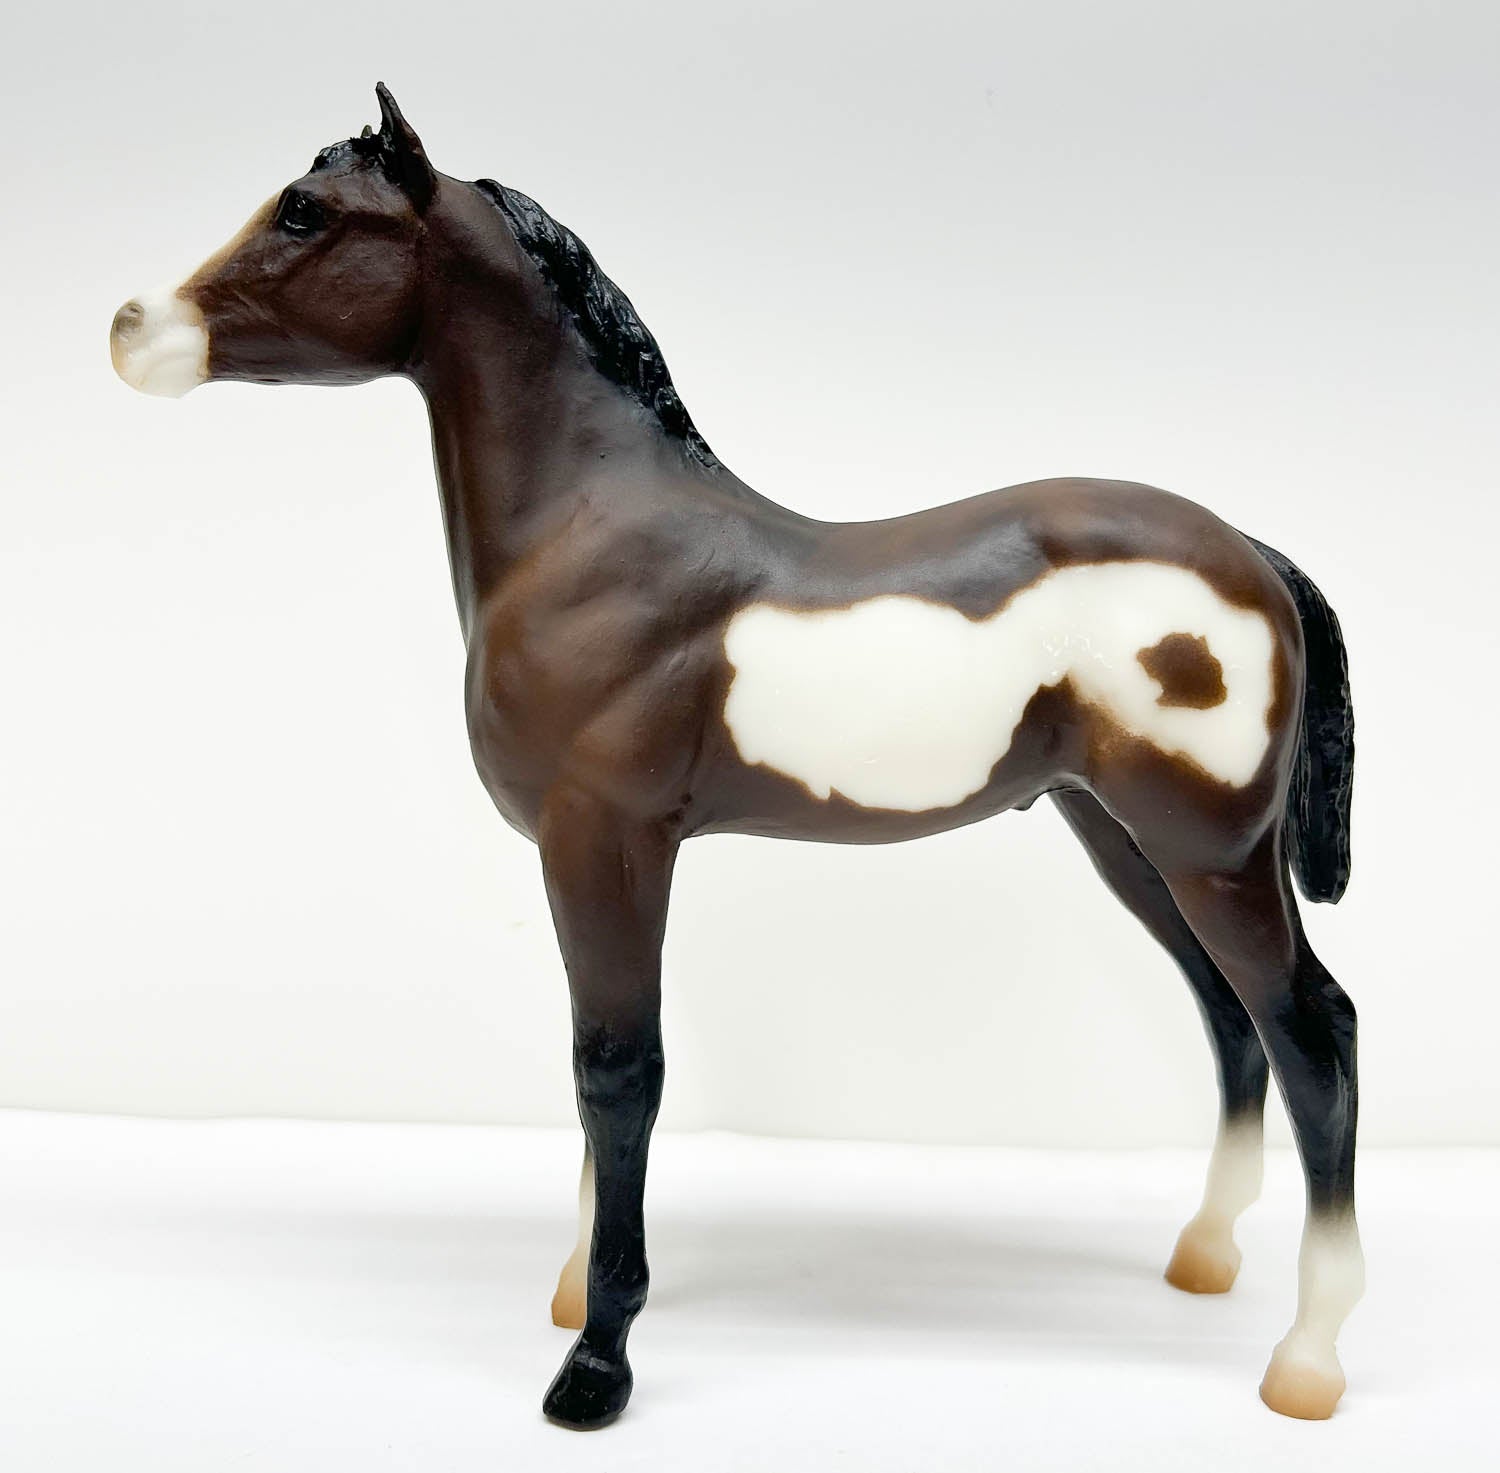 Standing Stock Horse Foal ~ Spirit of the West SR